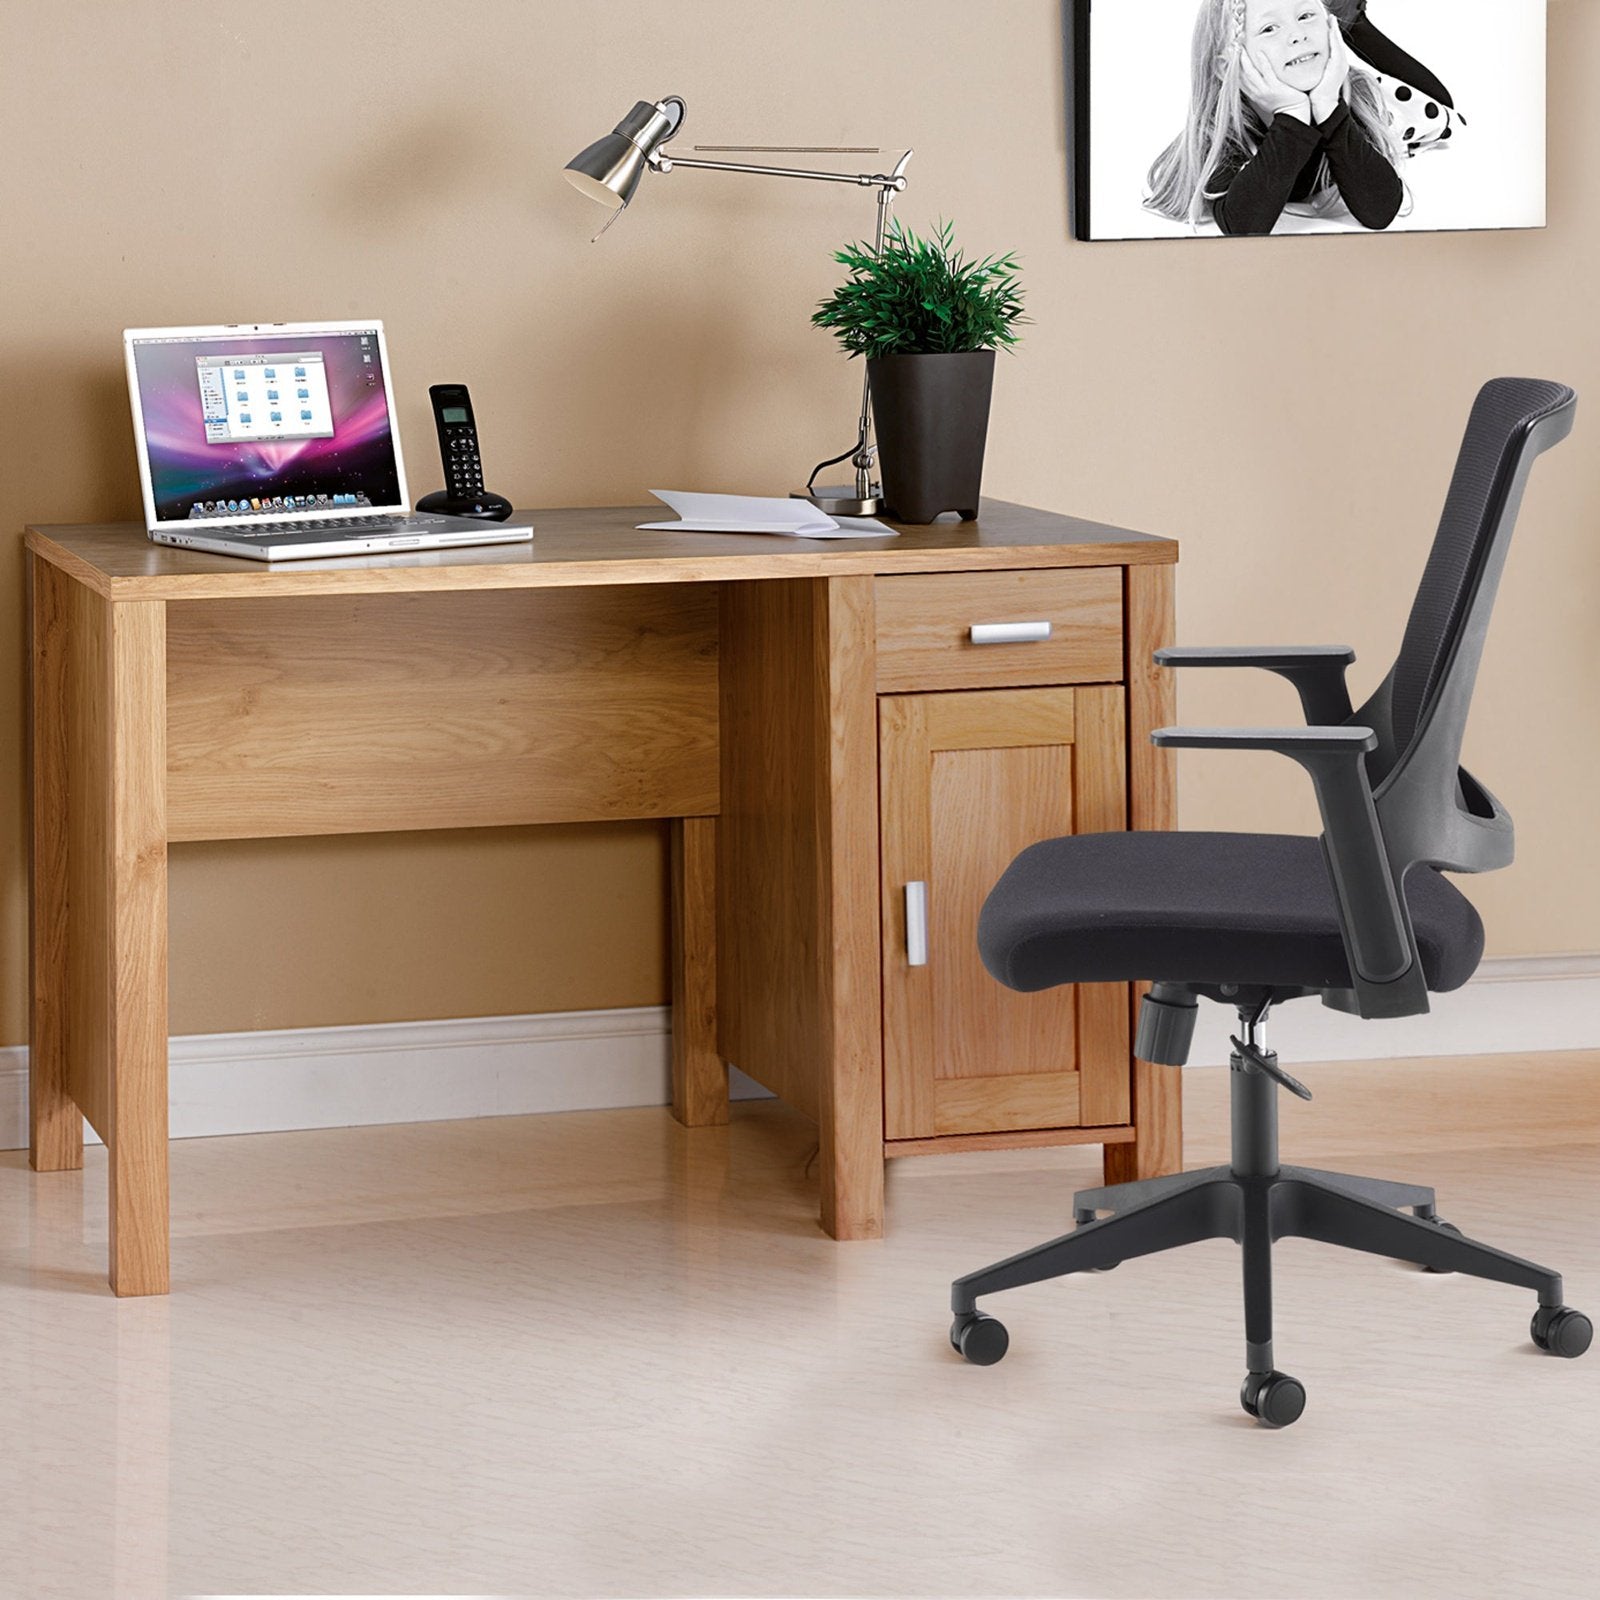 Amazon home office workstation with integrated drawer and cupboard unit - oak - Office Products Online